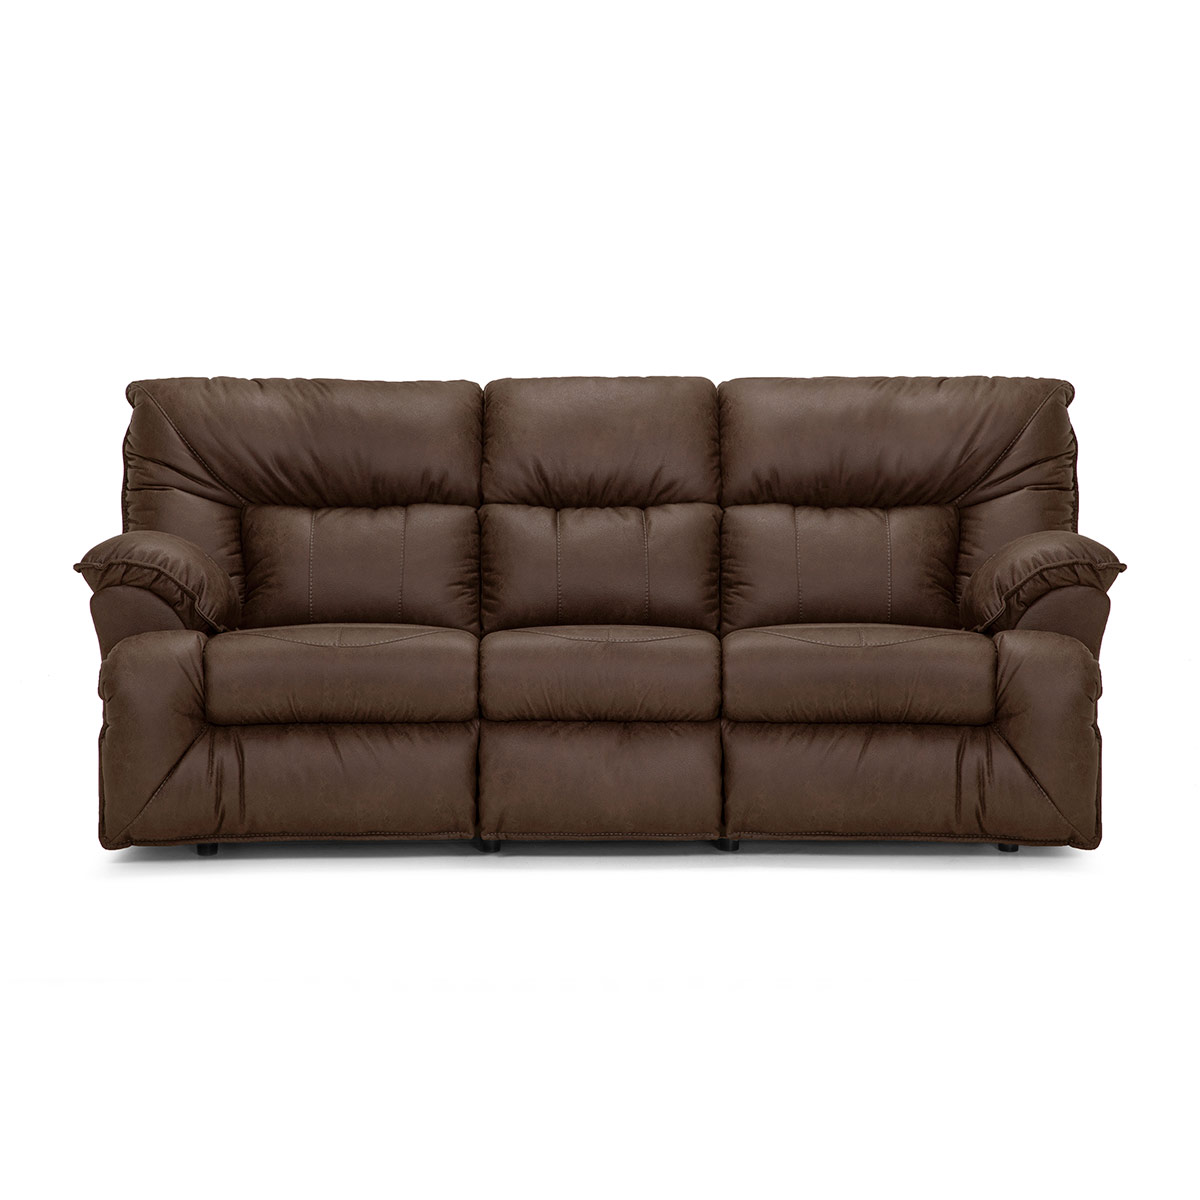 Franklin Hector Reclining Sofa with Drop Down Table